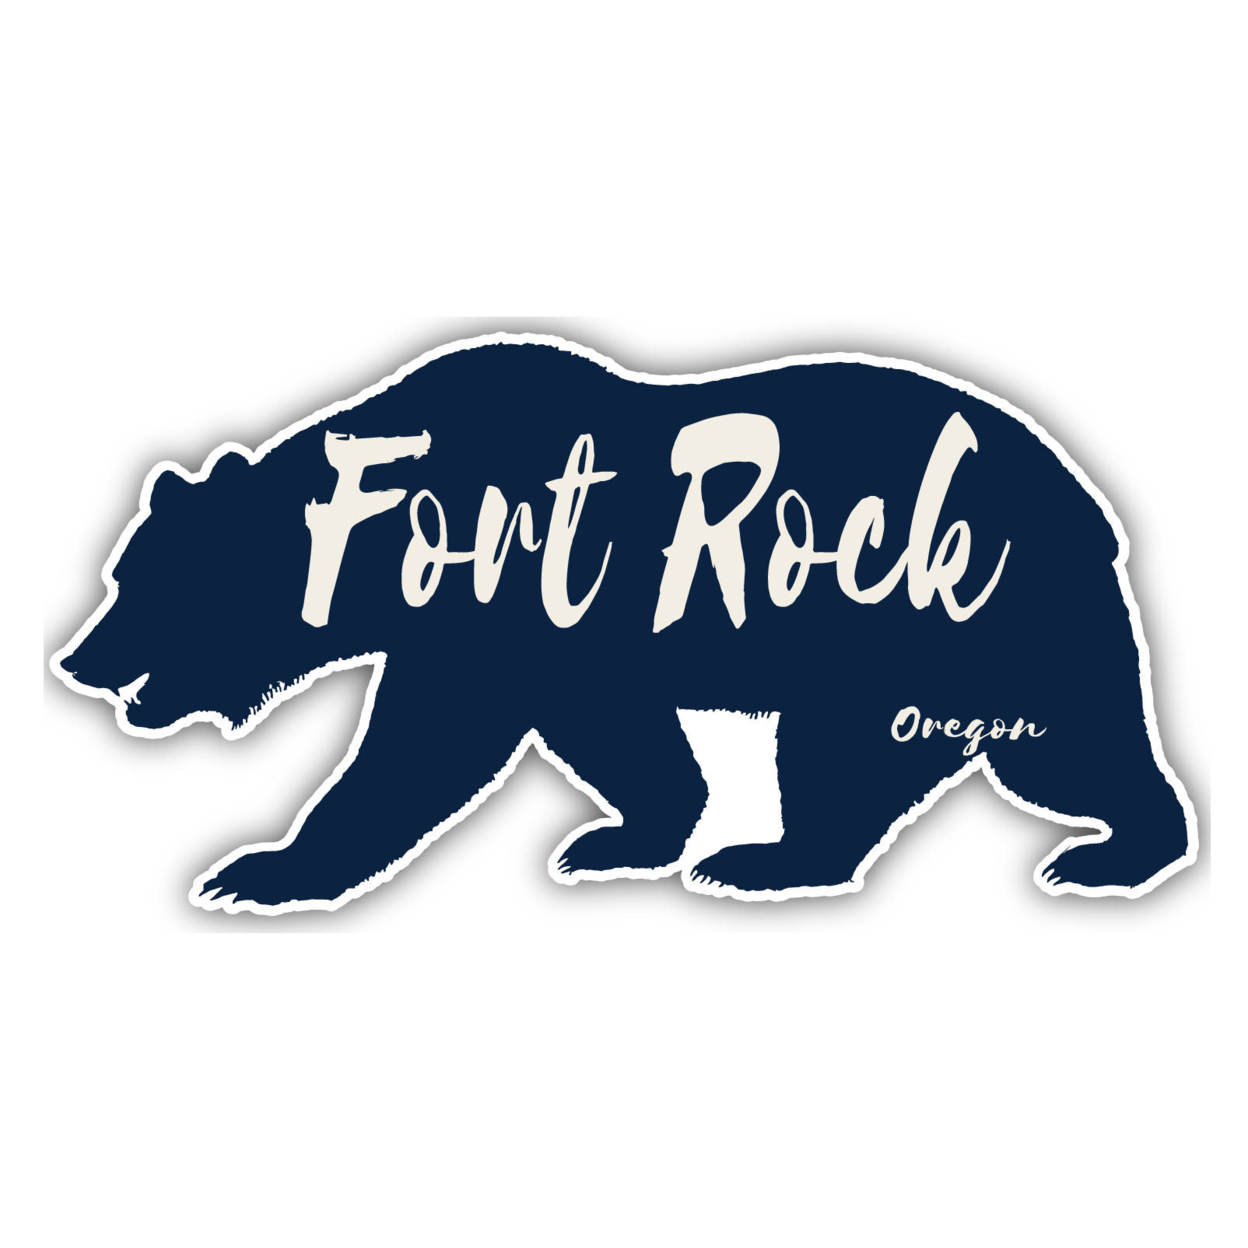 Fort Rock Oregon Souvenir Decorative Stickers (Choose Theme And Size) - 4-Pack, 12-Inch, Bear